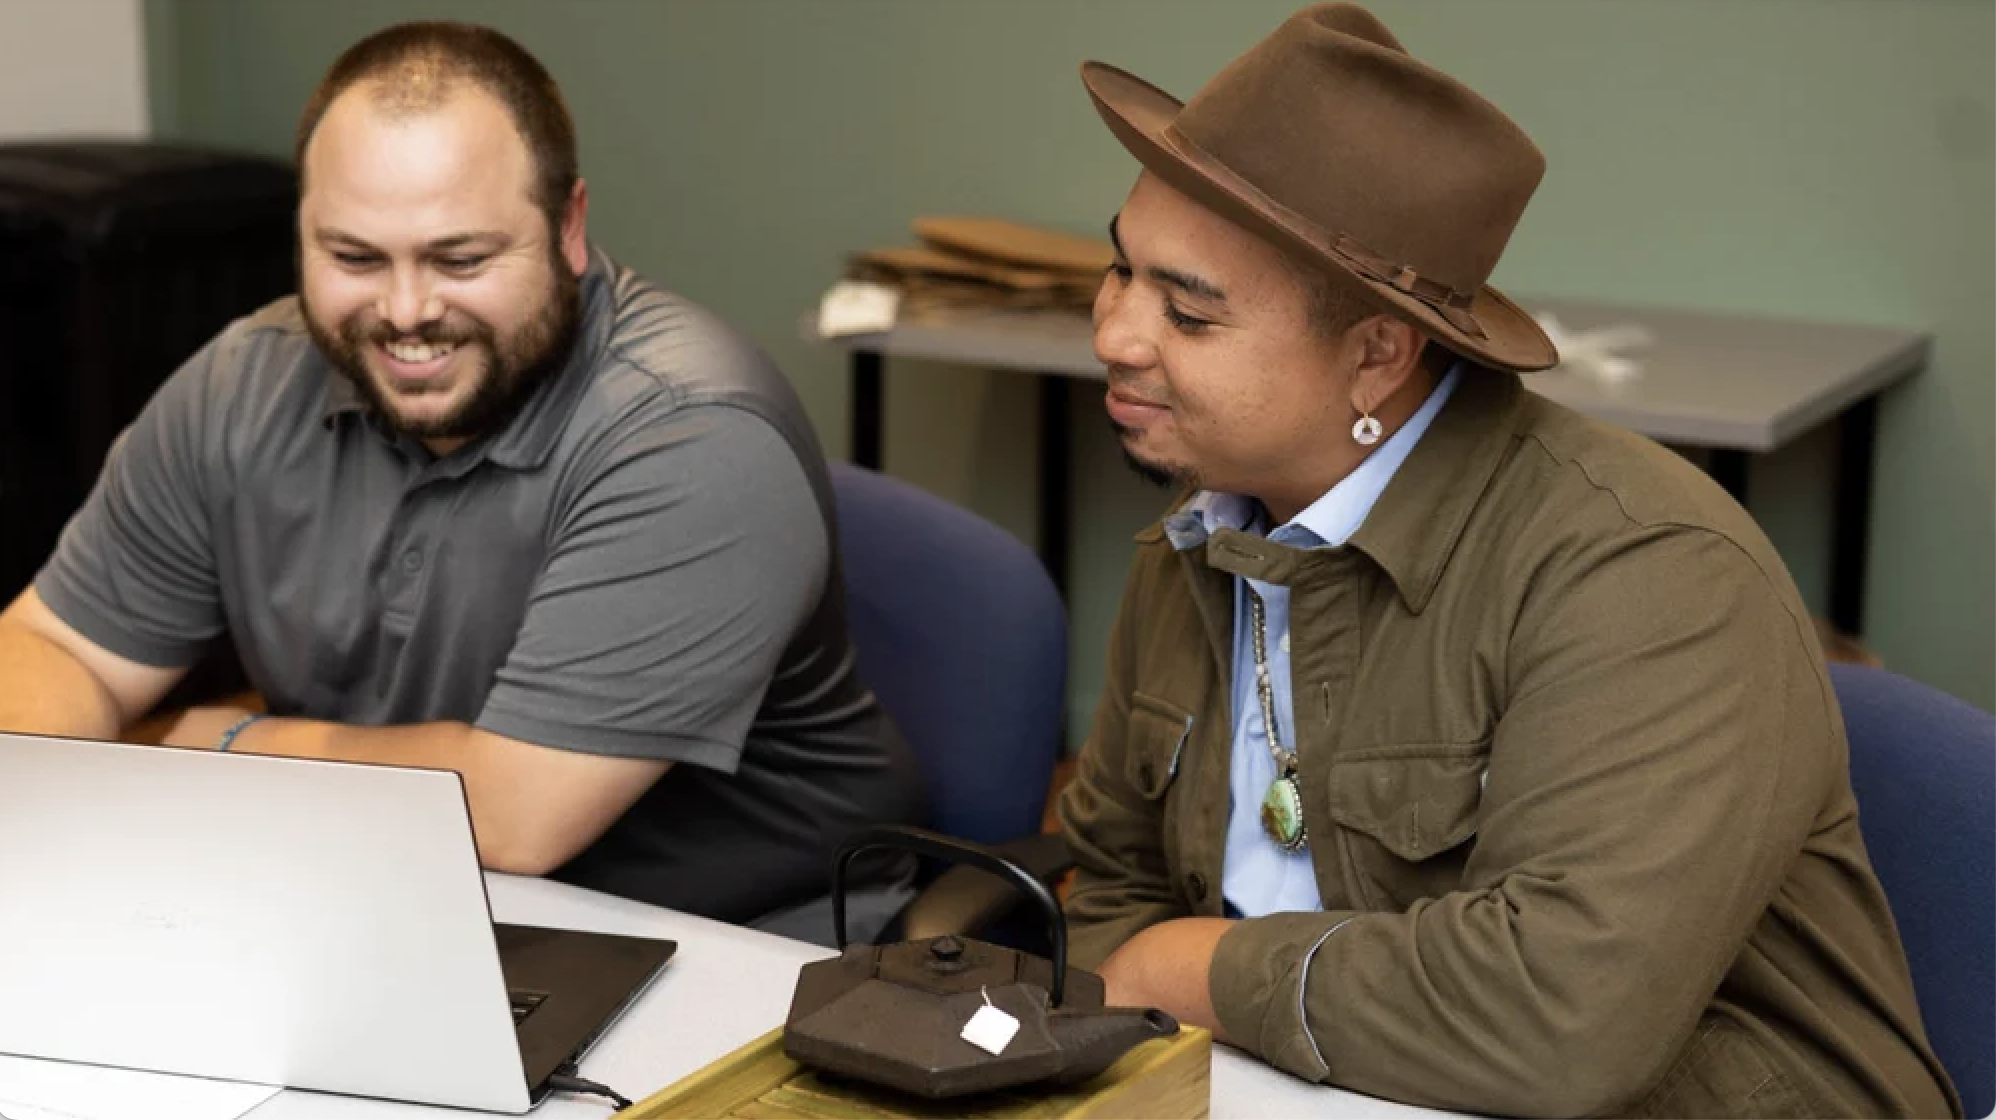 Two men sit smiling looking at a laptop screen during a digital coaching session focused on Indigenous-owned businesses. One wears a dark gray collared t-shirt and the other is wearing a brown brimmed hat and jacket, and a wampum earring and turquoise medallion with silver cord seeds representing his tribe and the Southwest.